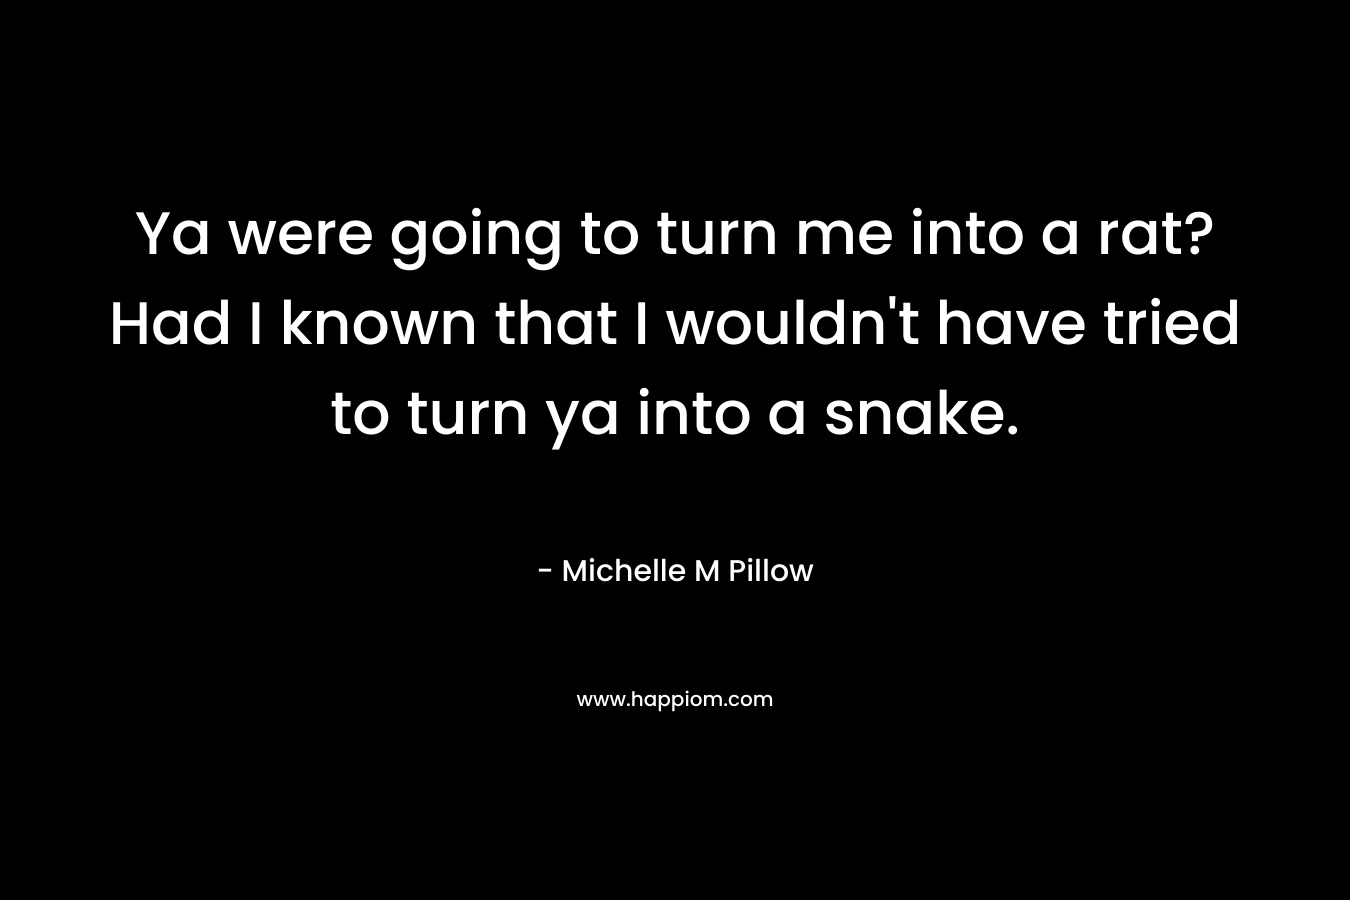 Ya were going to turn me into a rat? Had I known that I wouldn’t have tried to turn ya into a snake. – Michelle M Pillow